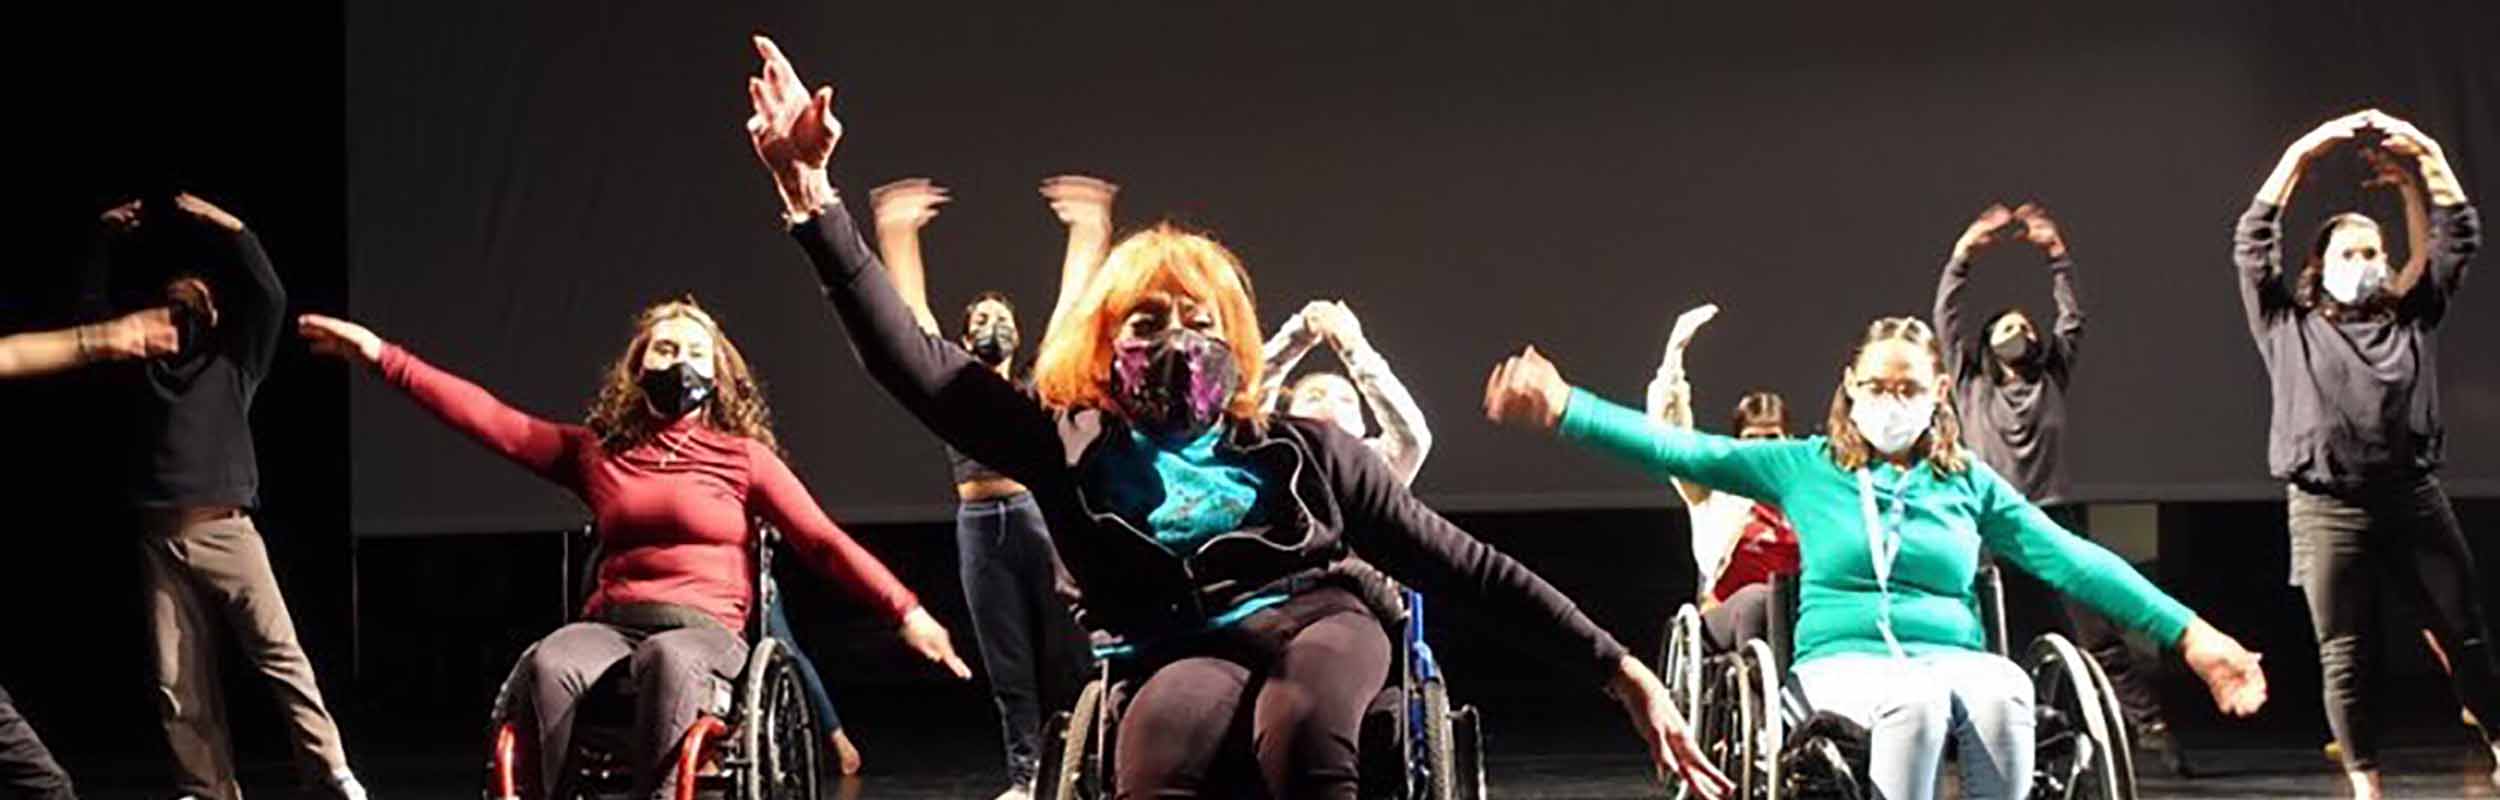 Dancers with and without disabilities taking class together utilizing movement translations